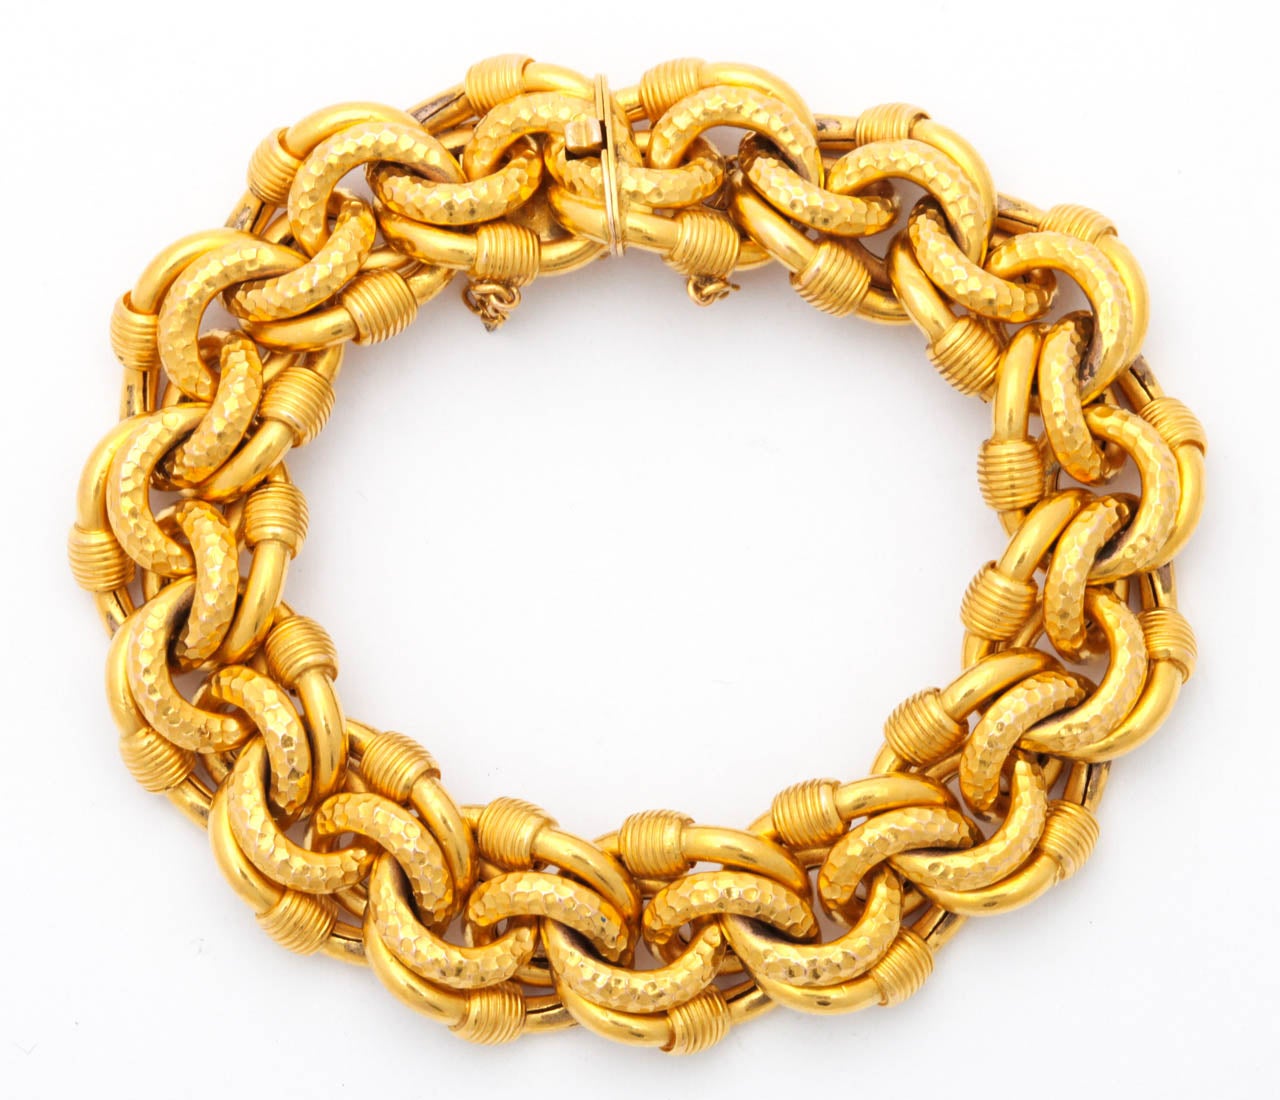 Links, links and more links connect in groups of eight to take the shape of a double pretzel or love knot. The links grasp each other like little claws. Some are faceted, others are smooth and wrapped, thereby making the variety of texture you find